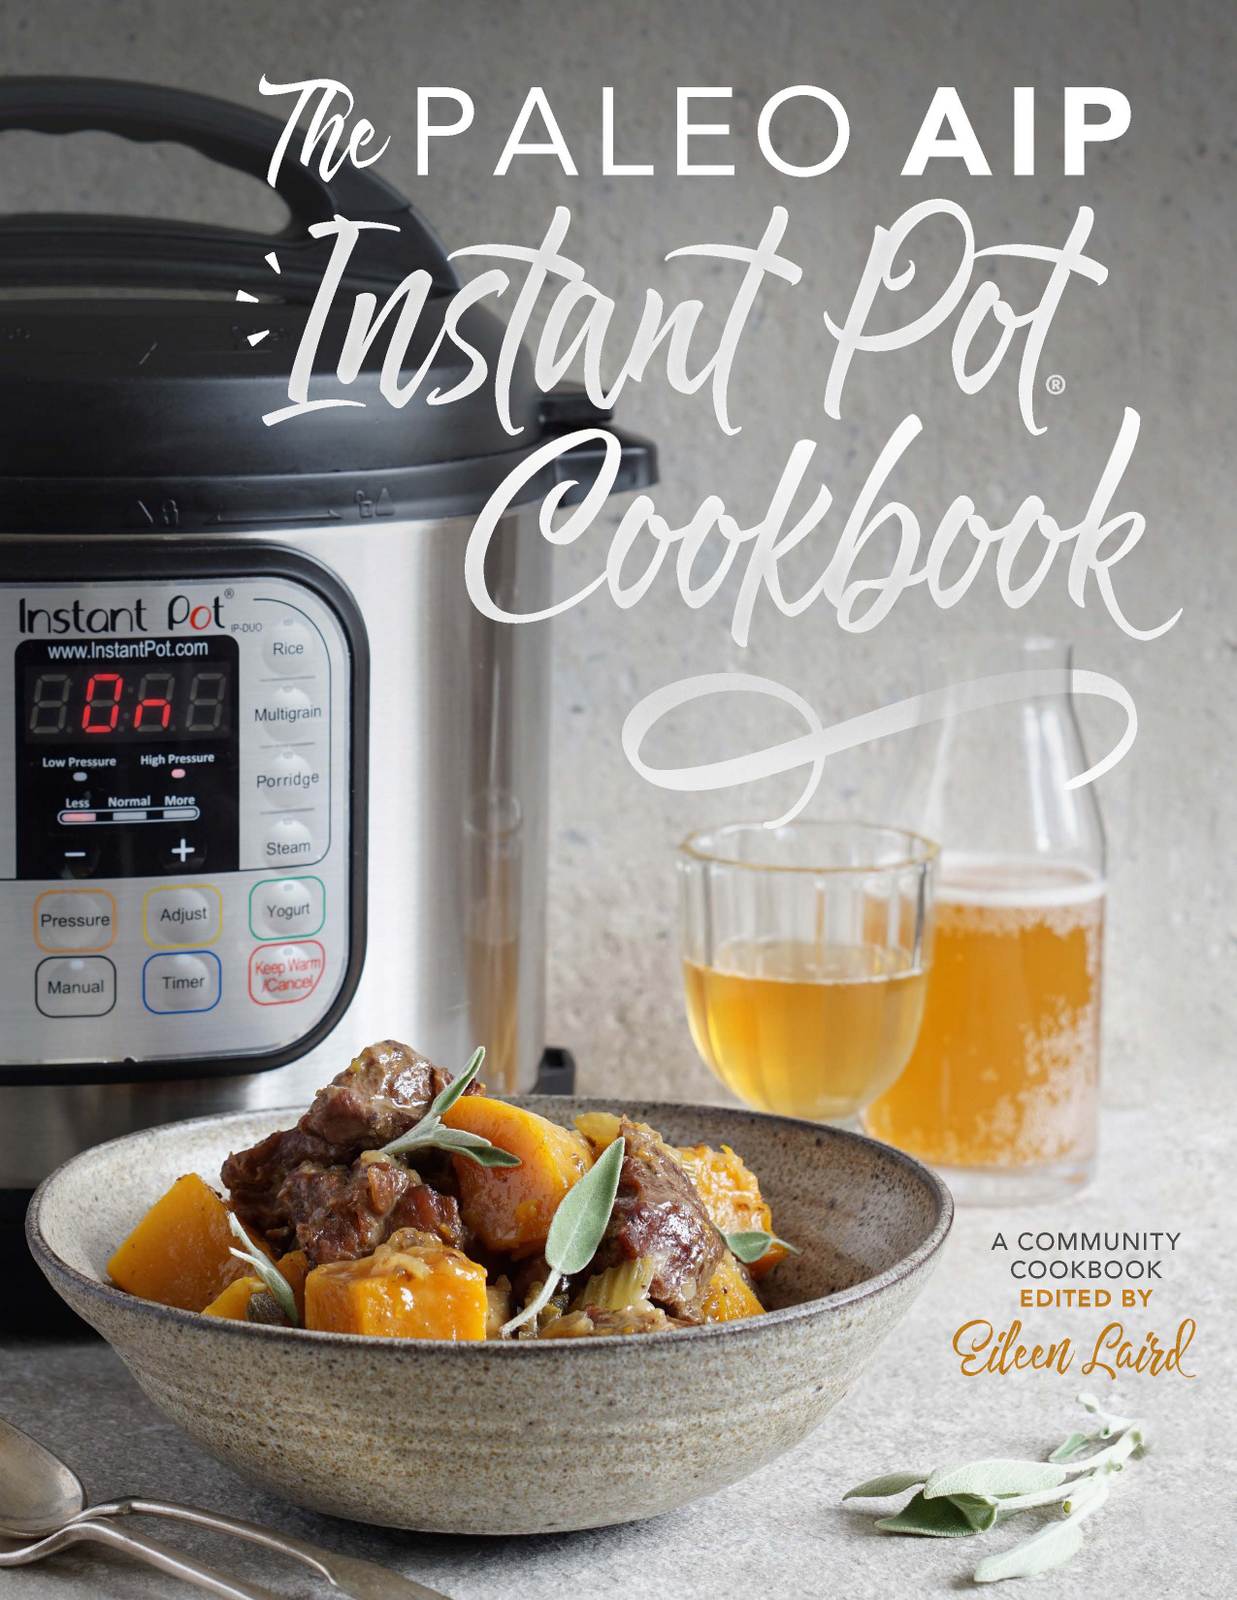 Cookbook cover showing the instant pot along with a bowl of lamb butternut stew